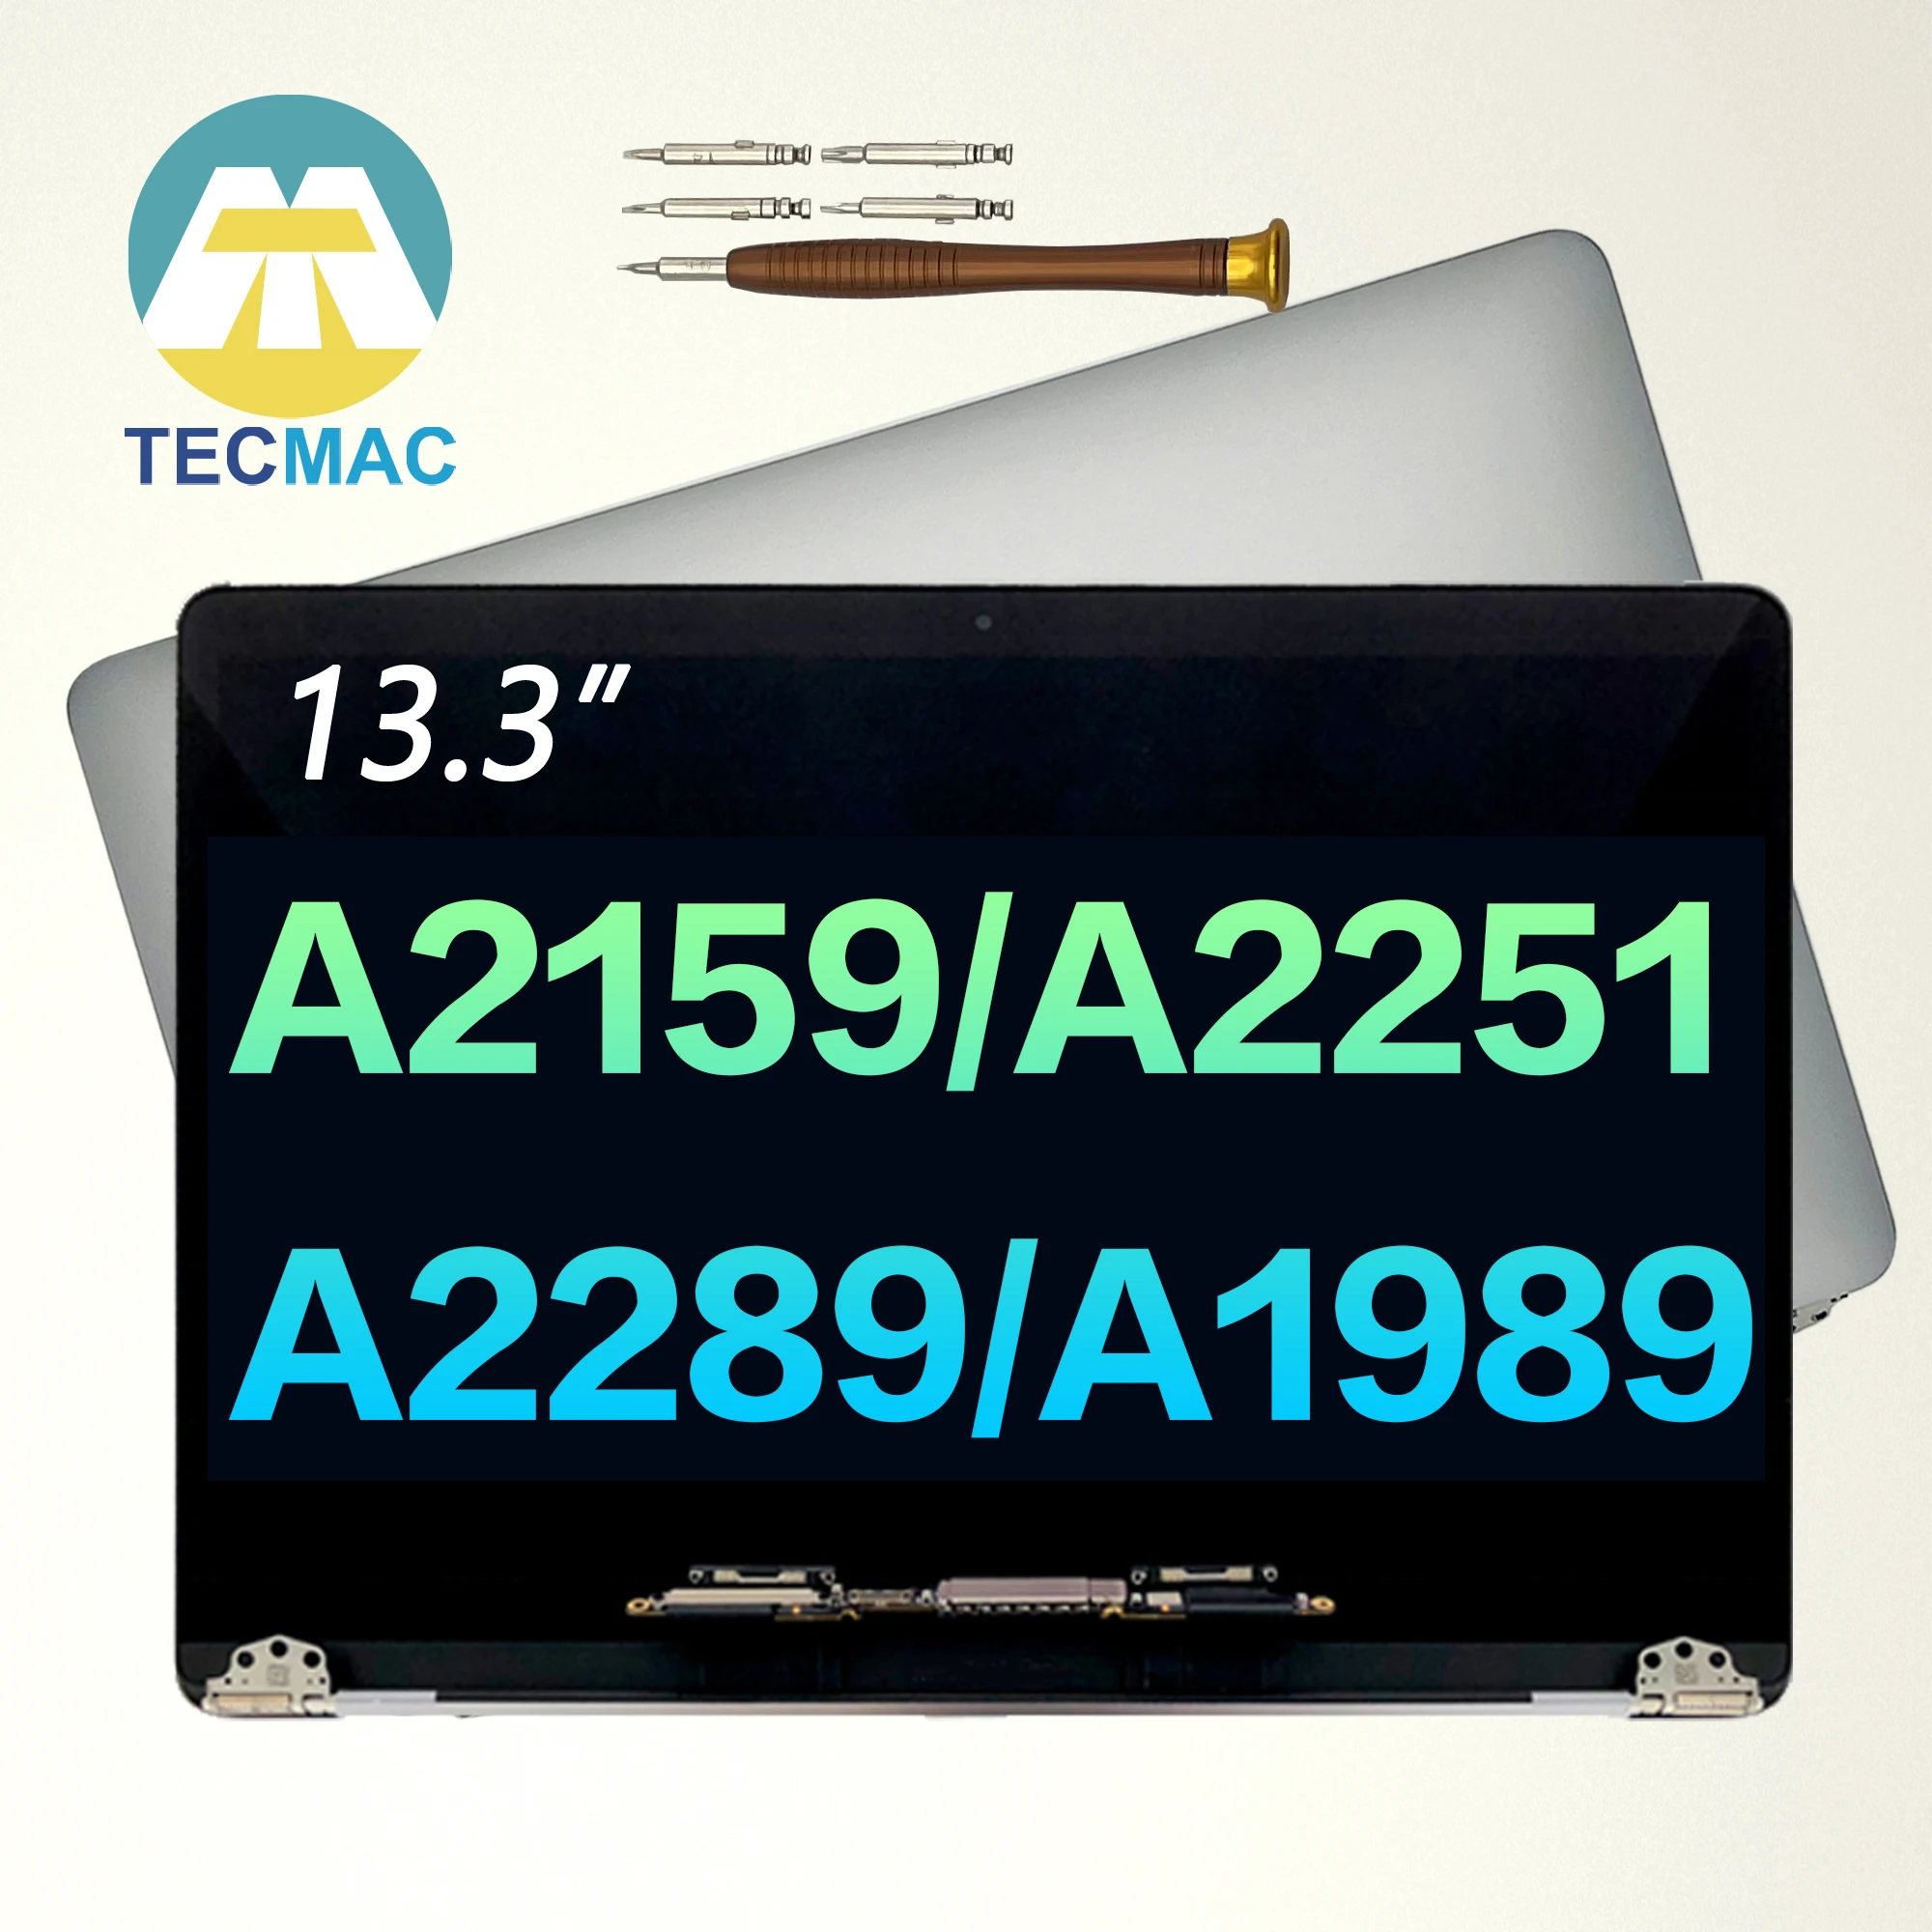 

New A2159 A2251 A2289 A1989 Display LCD Screen Replacement for Macbook Pro 13" EMC 3214 3301 3348 3456 3358 Space Gray Silver